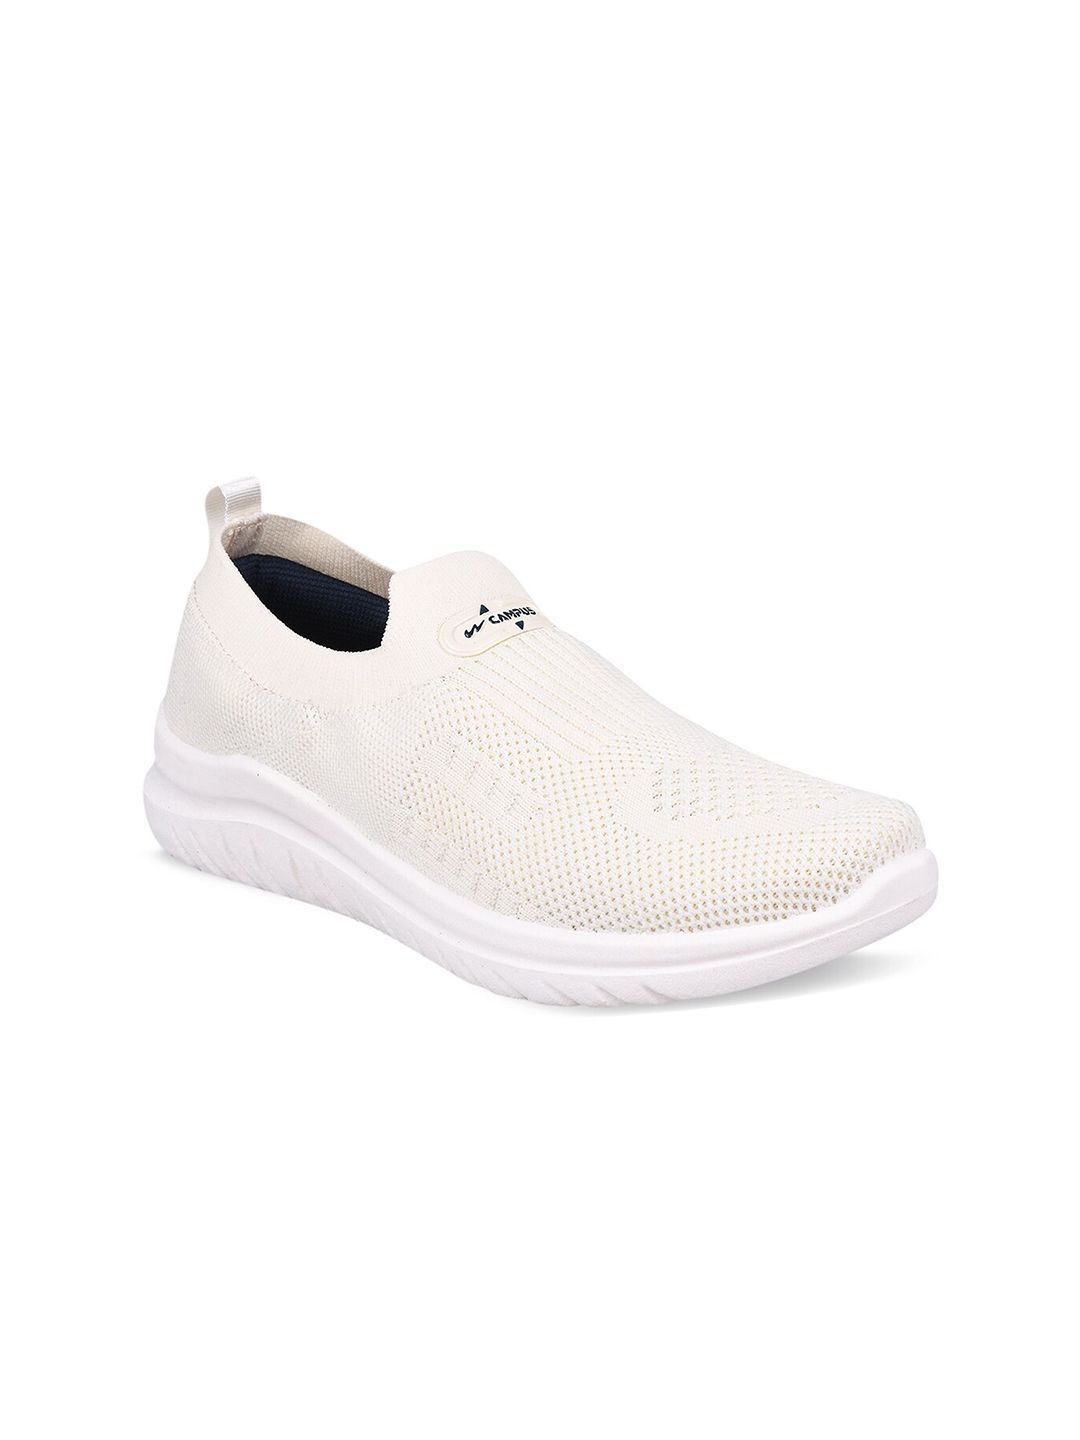 Campus Women Off White Mesh Walking Shoes Price in India